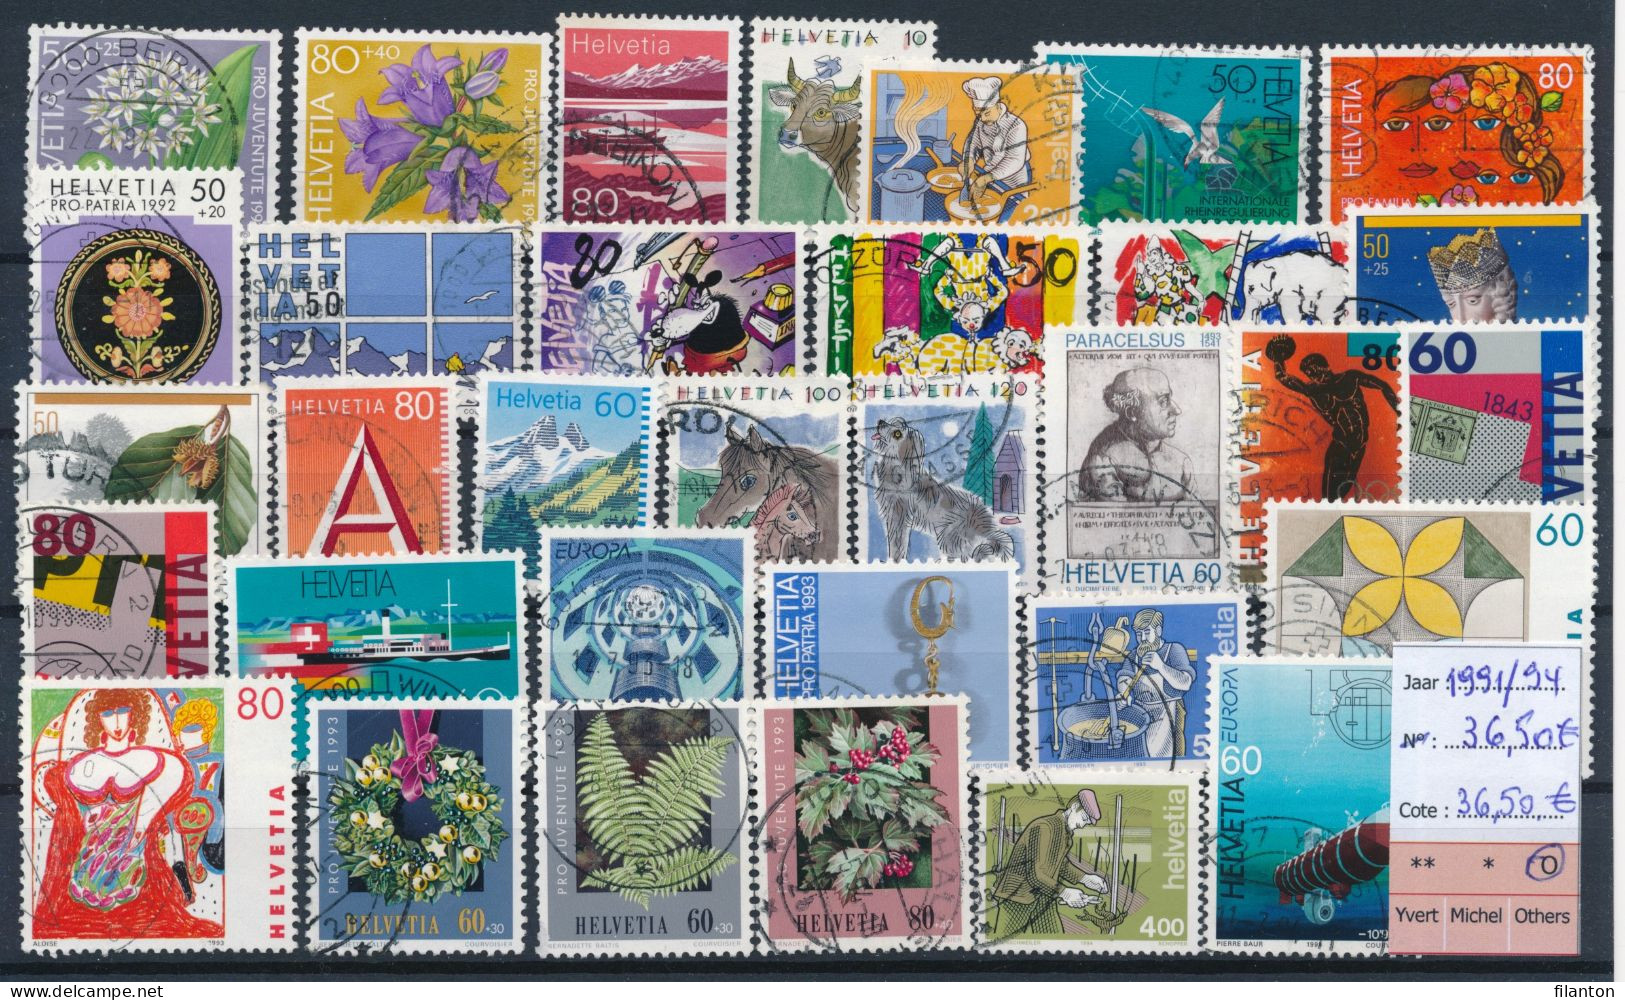 HELVETIA - Selection Periode 1991-1994 - Gest./obl./cancelled - Cote 36,50 € - (ref. JOH 180) - Collections